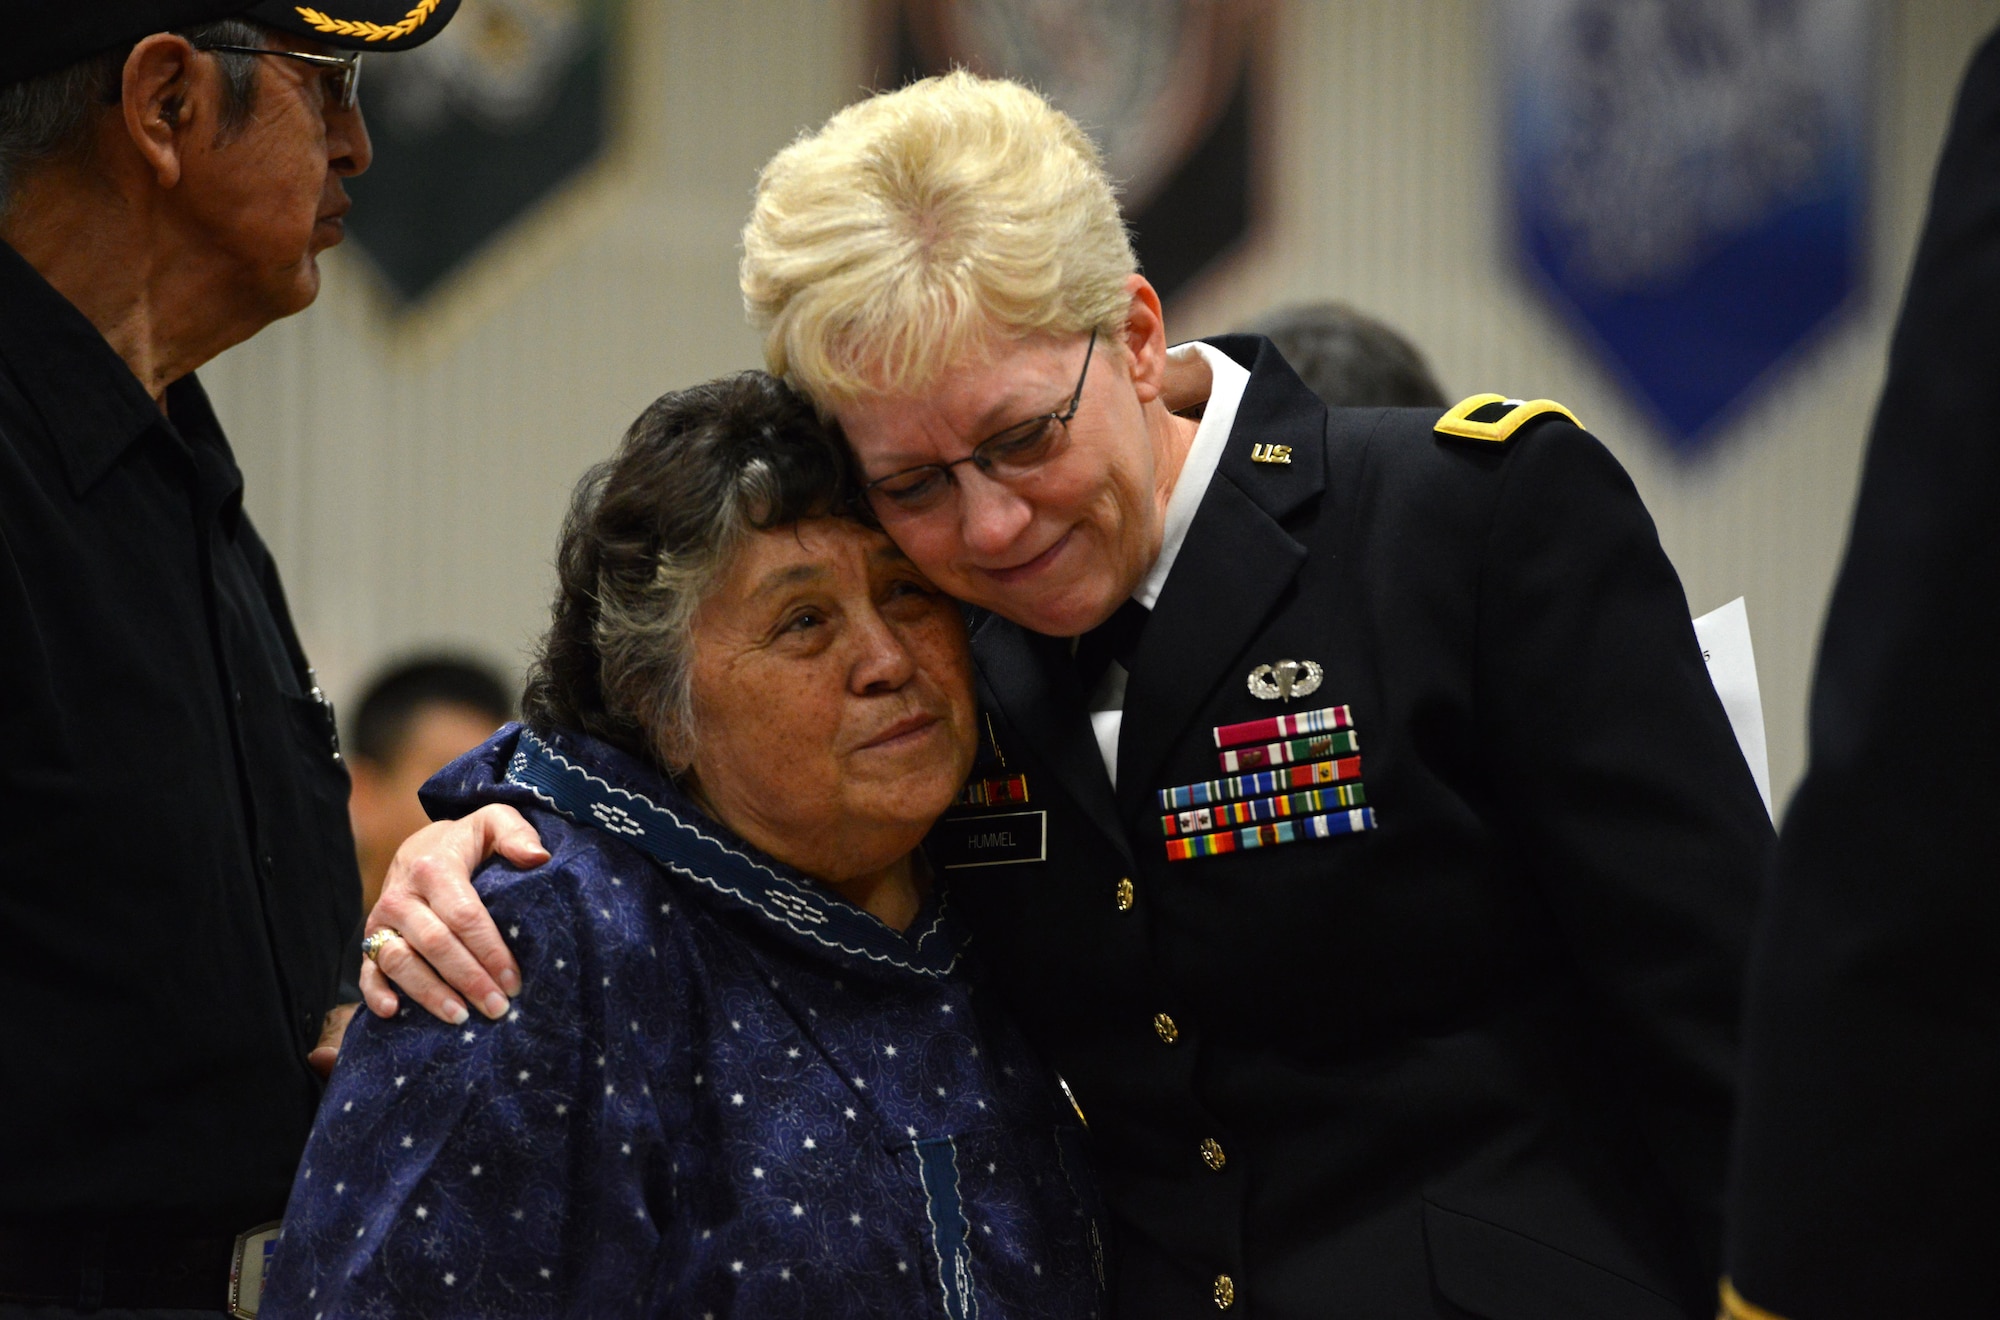 Brig. Gen. Laurie Hummel, Alaska National Guard adjutant general, embraces Mary Schaeffer, wife of former Alaska Adjutant General Maj. Gen. John Schaeffer Jr, during the late general’s memorial service at Kotzebue, Alaska, Aug. 31, 2016. Schaeffer enlisted in the Alaska National Guard in 1957, and served for 34 years.  Schaeffer was the first Alaska Native two-star general of the Alaska National Guard and commissioner of the Alaska Department of Military and Veterans Affairs. He is survived by Mary his wife of 56 years. (U.S. Air Force photo by Airman 1st Class Javier Alvarez)